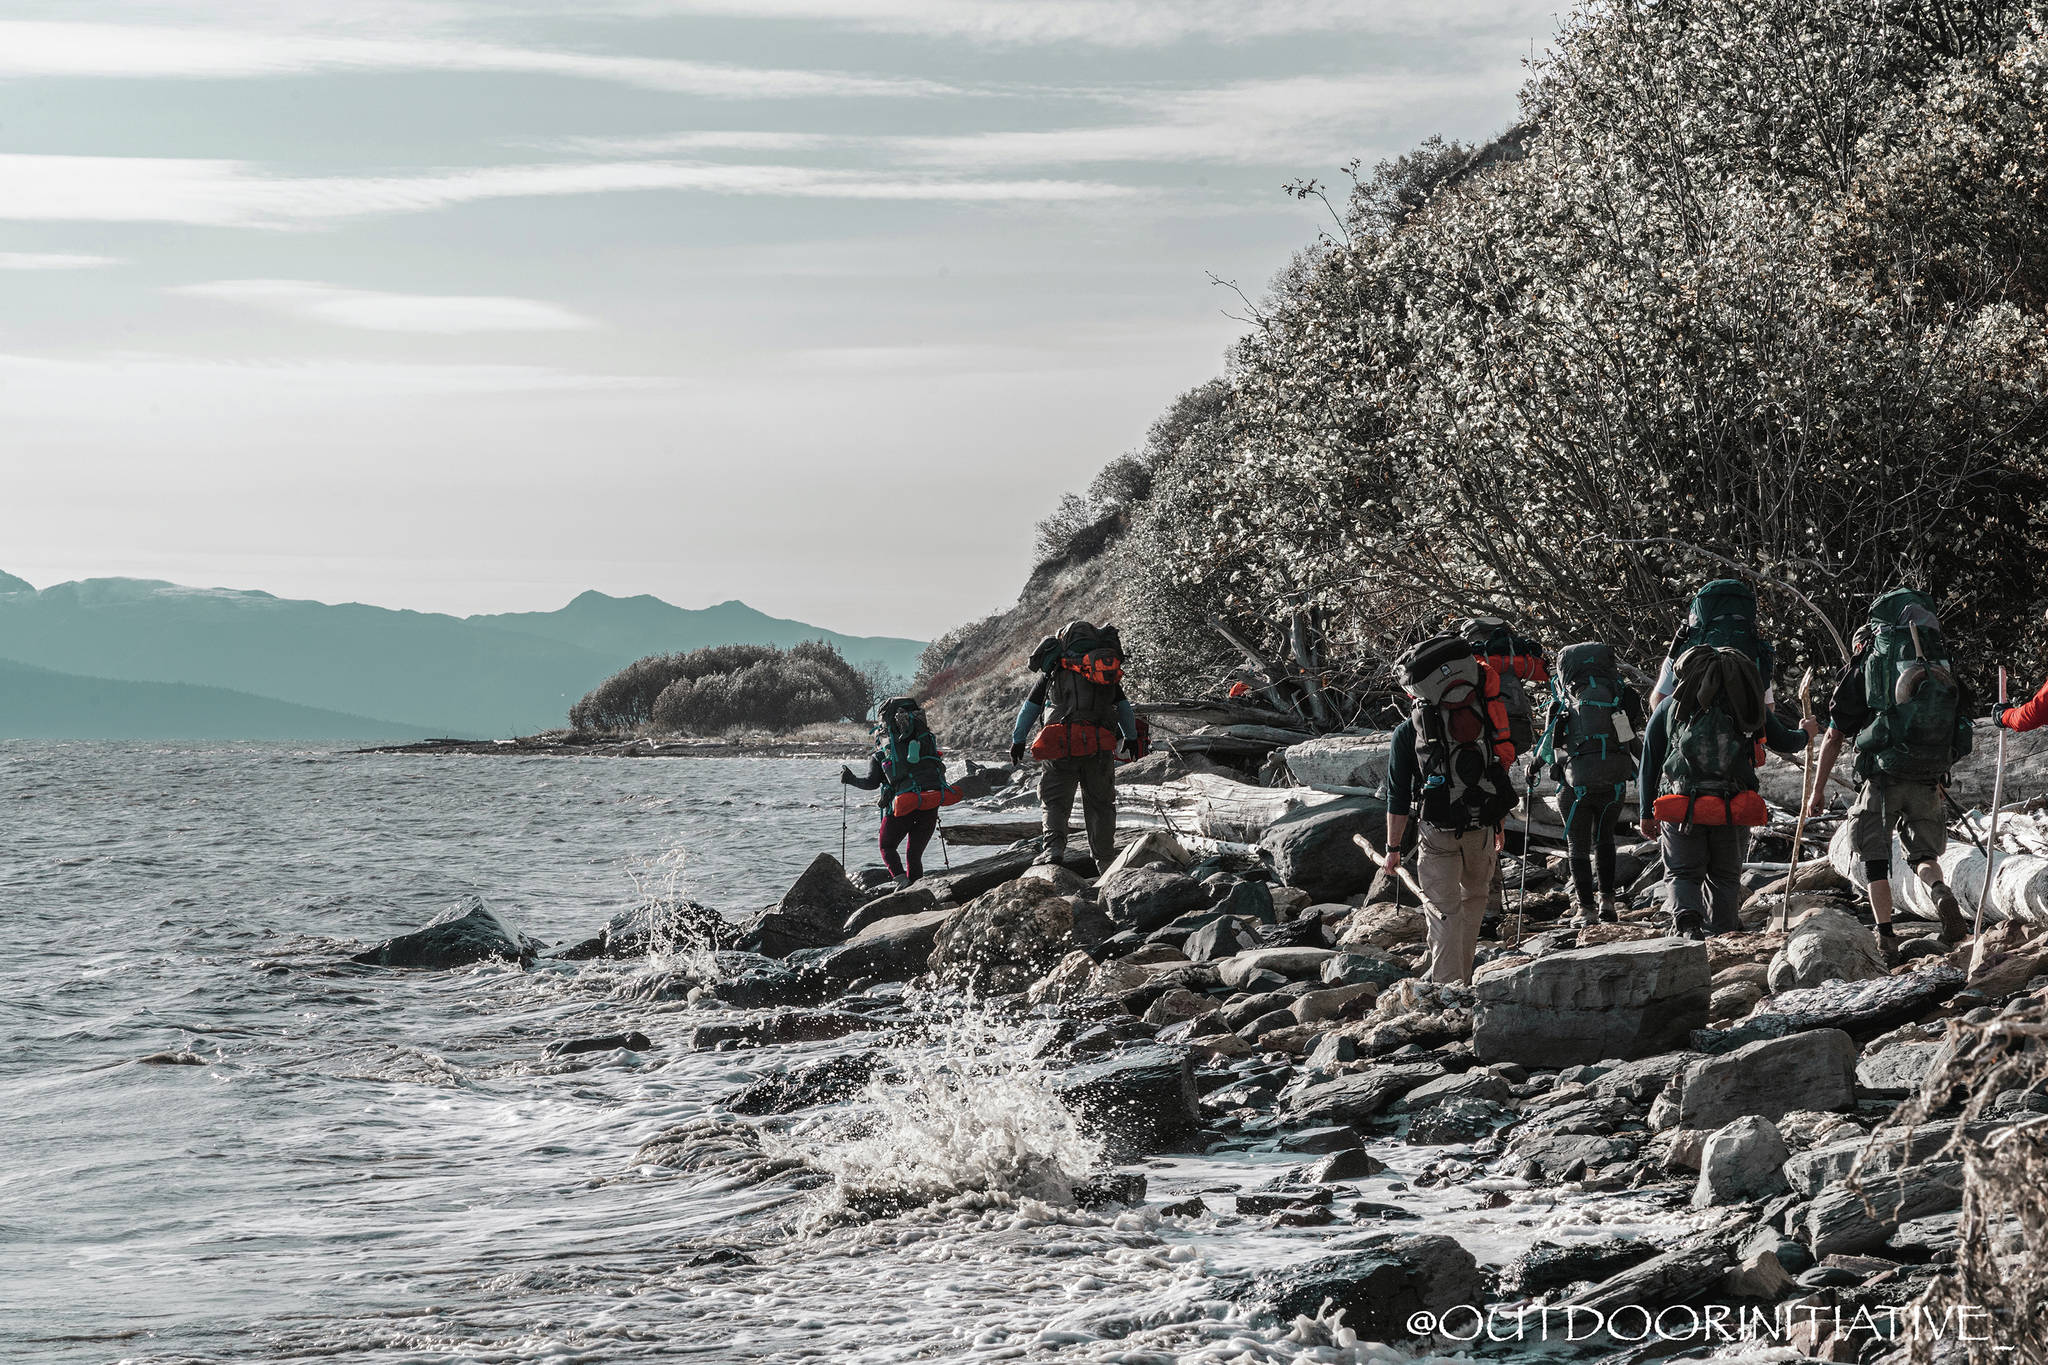 Veterans who participated in the 23rd Veteran trip to Homer, Alaska, scramble around rocks on an incoming tide on a Kachemak Bay beach during their trip Oct. 11 to 16, 2020, near Homer, Alaska. (Photo by Anthony Droz/Outdoor Initiative)